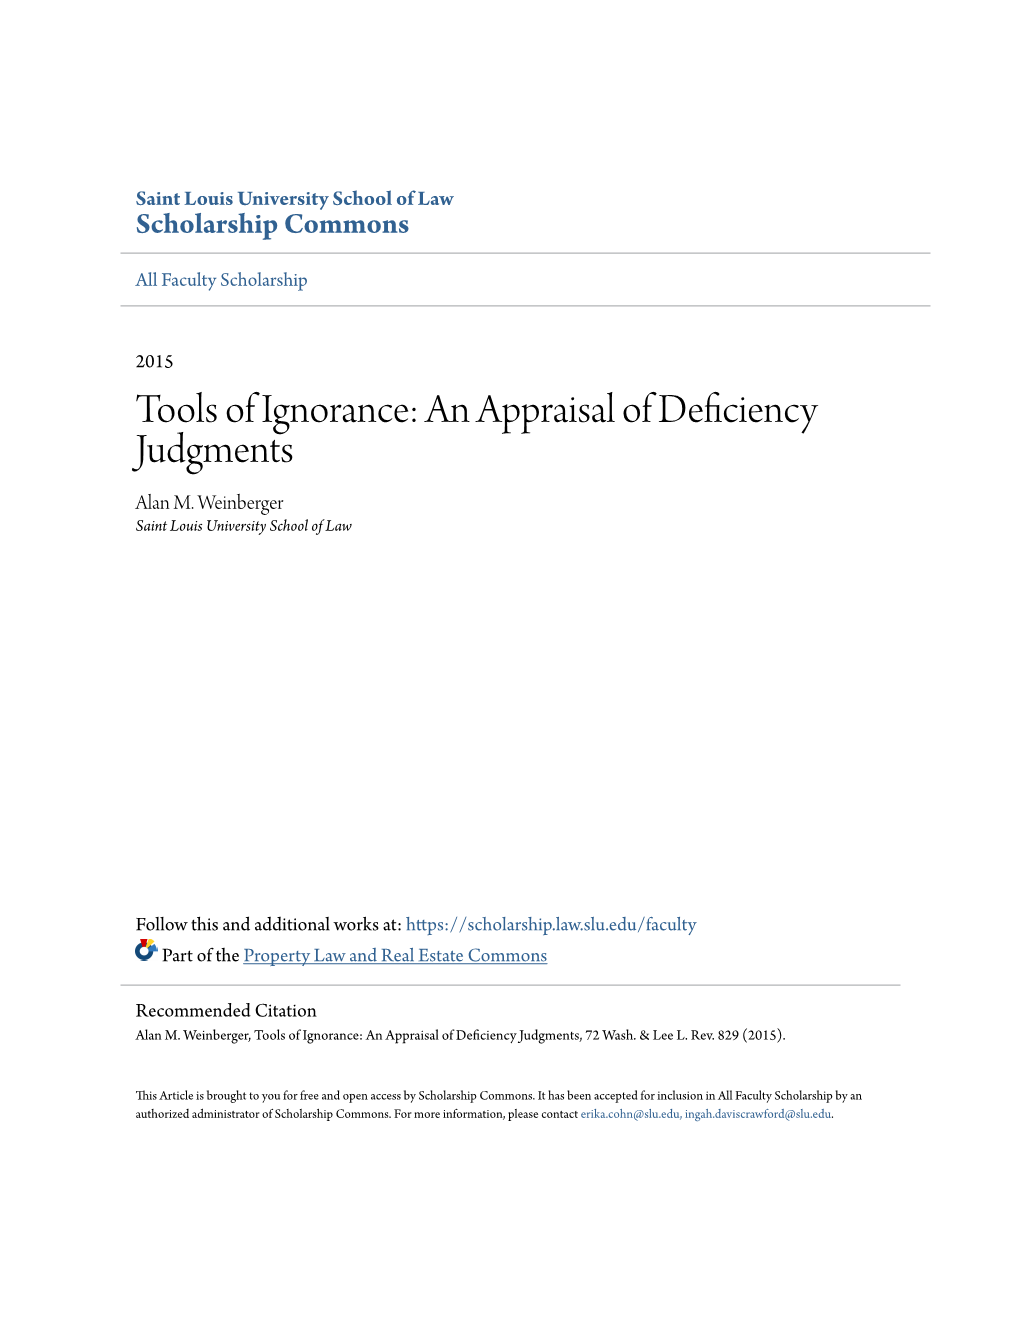 Tools of Ignorance: an Appraisal of Deficiency Judgments Alan M